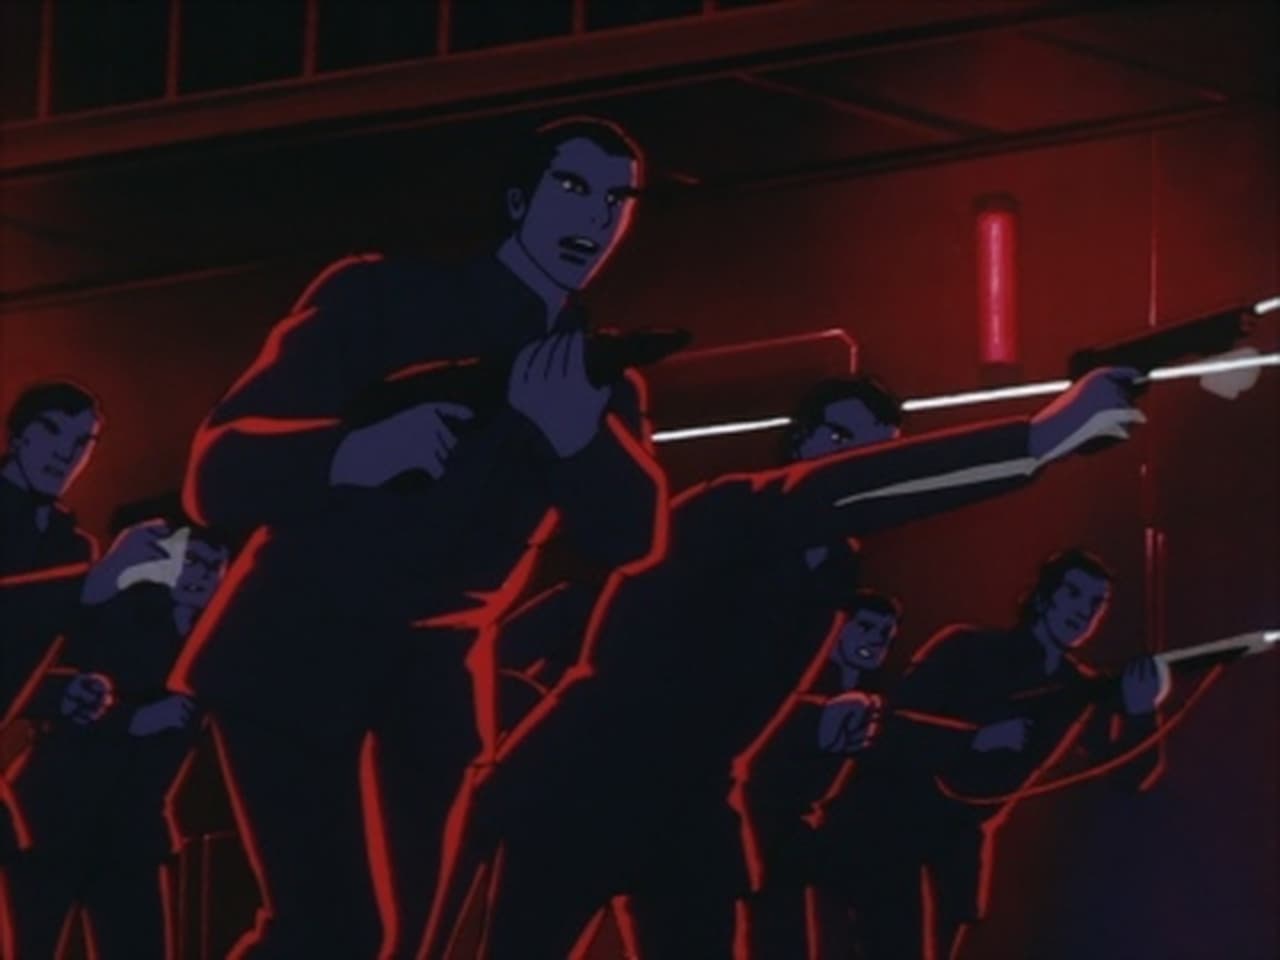 Legend of the Galactic Heroes - Season 4 Episode 19 : Planet of Confusion